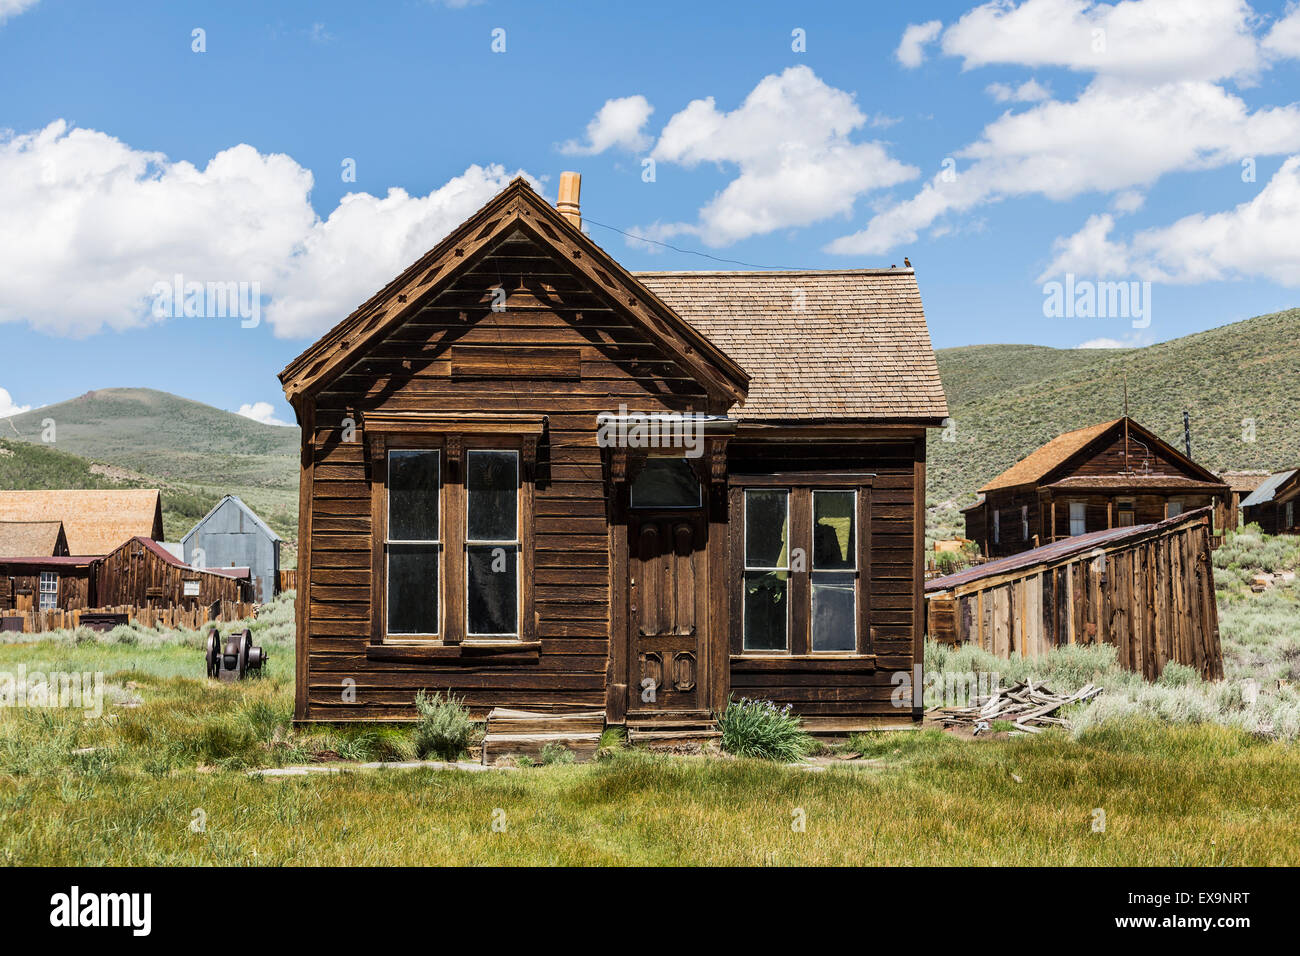 Rustic house at Bodie Ghost Town near Mammoth Lakes, California. Stock Photo